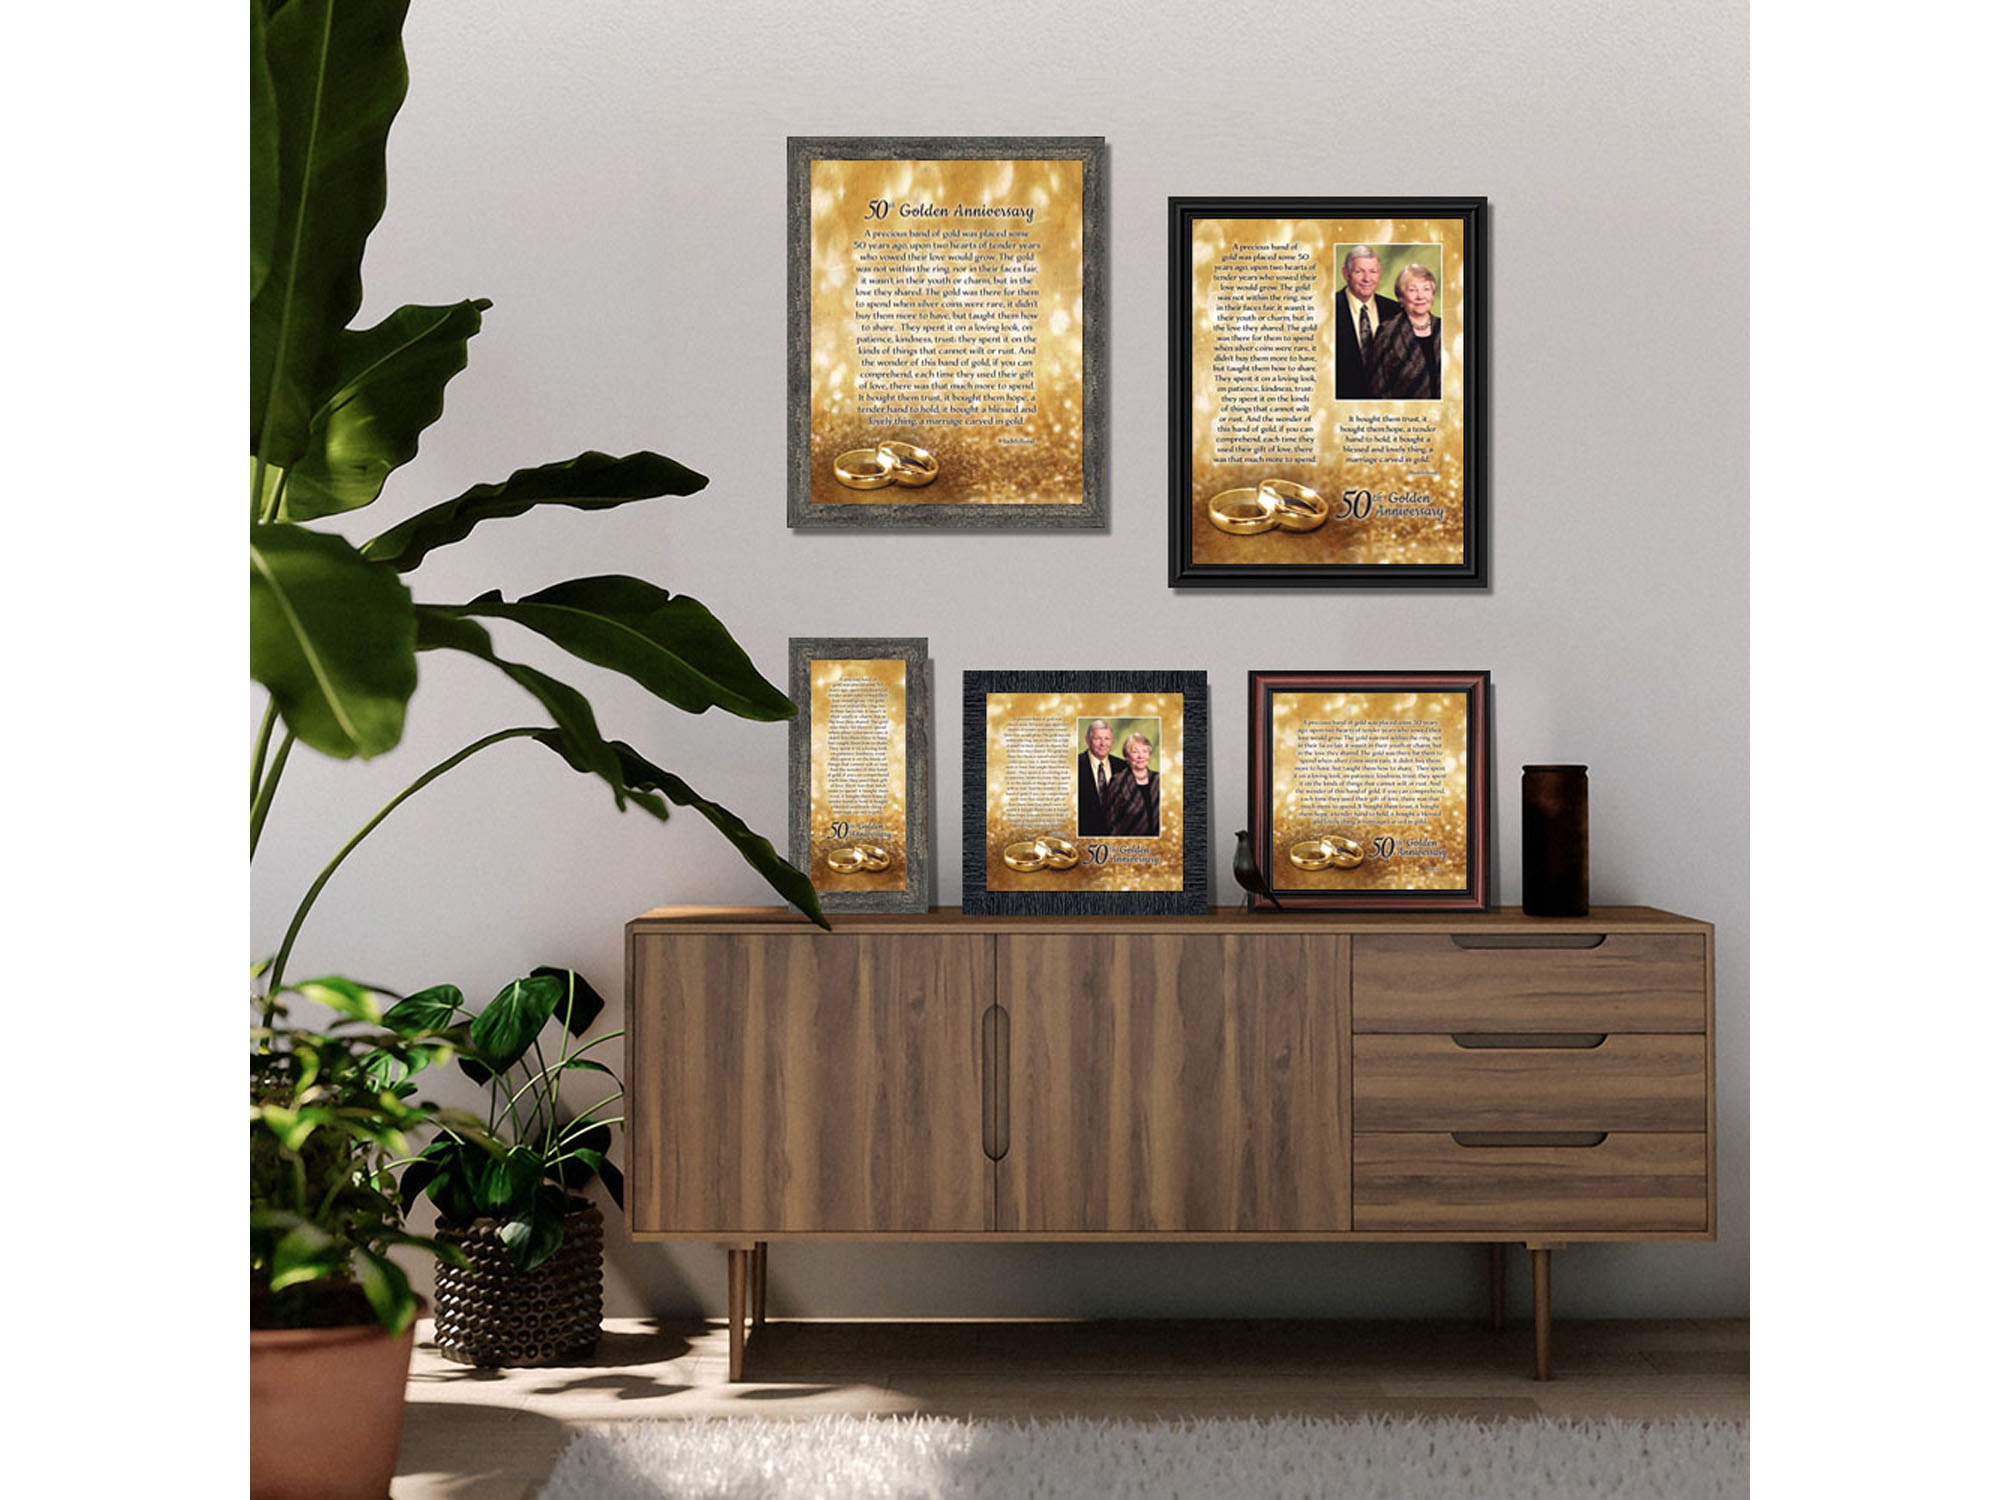 50th Wedding Anniversary Gifts for Parents, 50th Anniversary Decorations for Party, Golden Anniversary 50 Year Gifts, 50th Anniversary Gifts for Couples, Gift with 50th Anniversary Card 7318CH - image 4 of 8